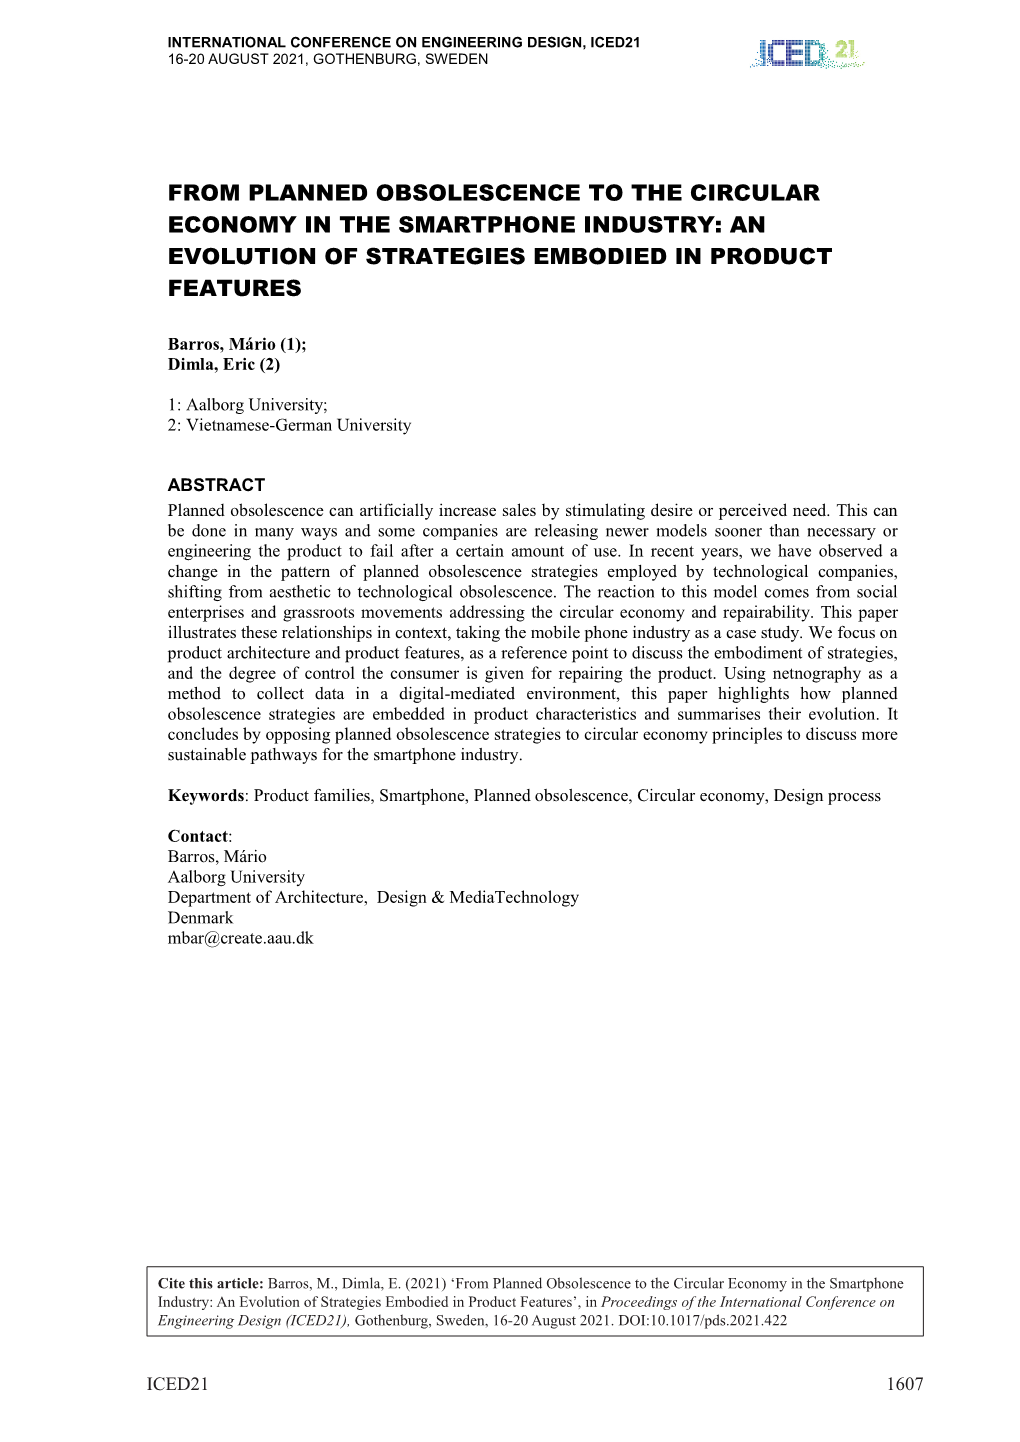 From Planned Obsolescence to the Circular Economy in the Smartphone Industry: an Evolution of Strategies Embodied in Product Features